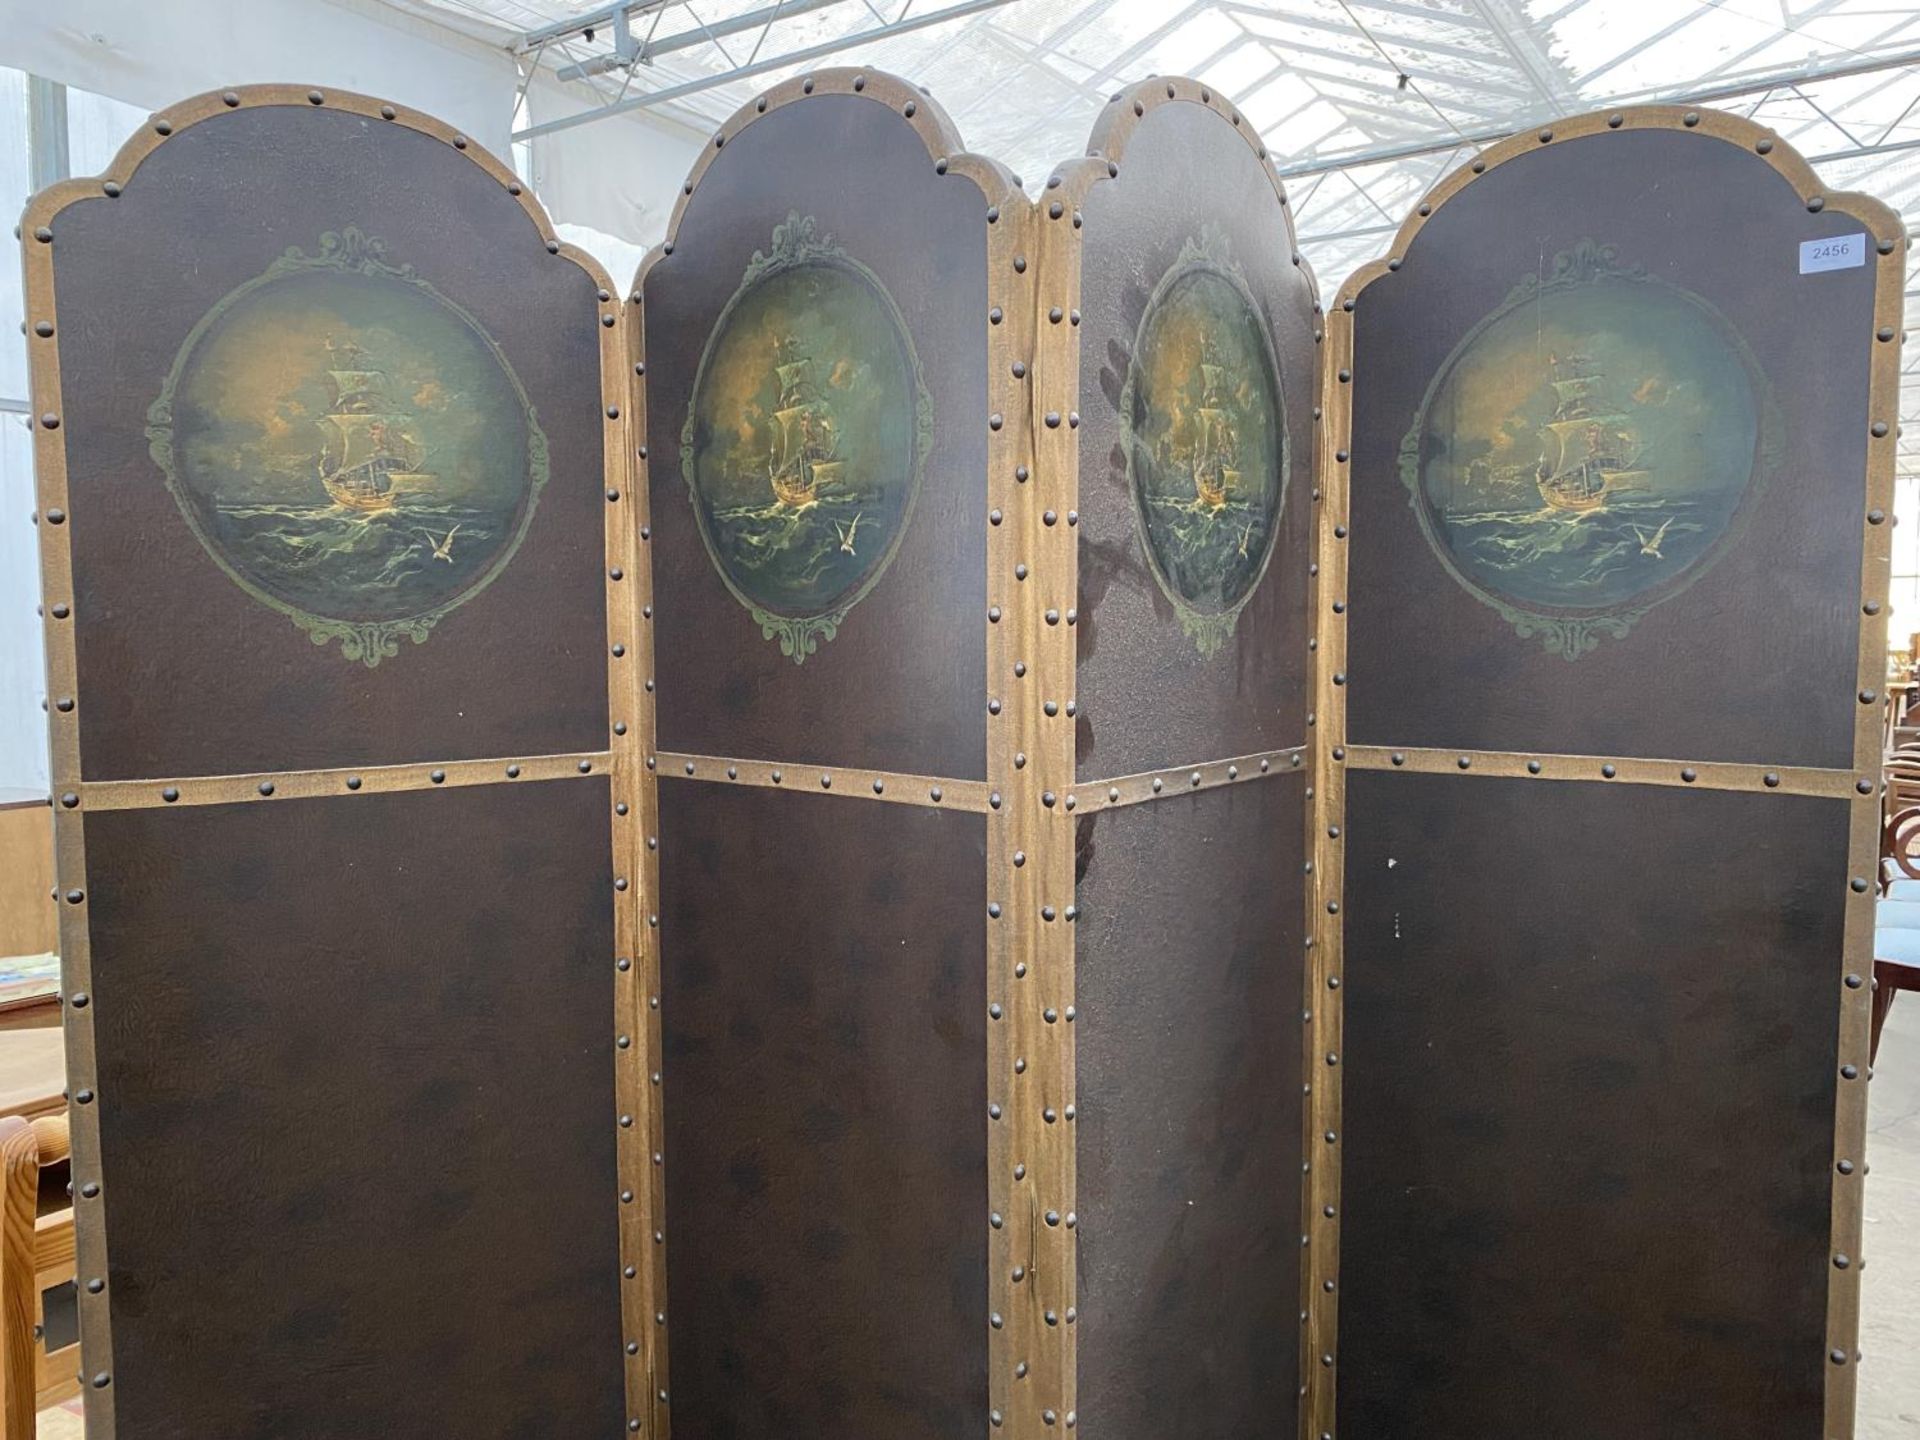 AN EDWARDIAN FOUR DIVISION STUDDED LEATHERETTE SCREEN WITH ARCHED TOPS HAVING PAINTED MASTED SHIP - Image 2 of 4